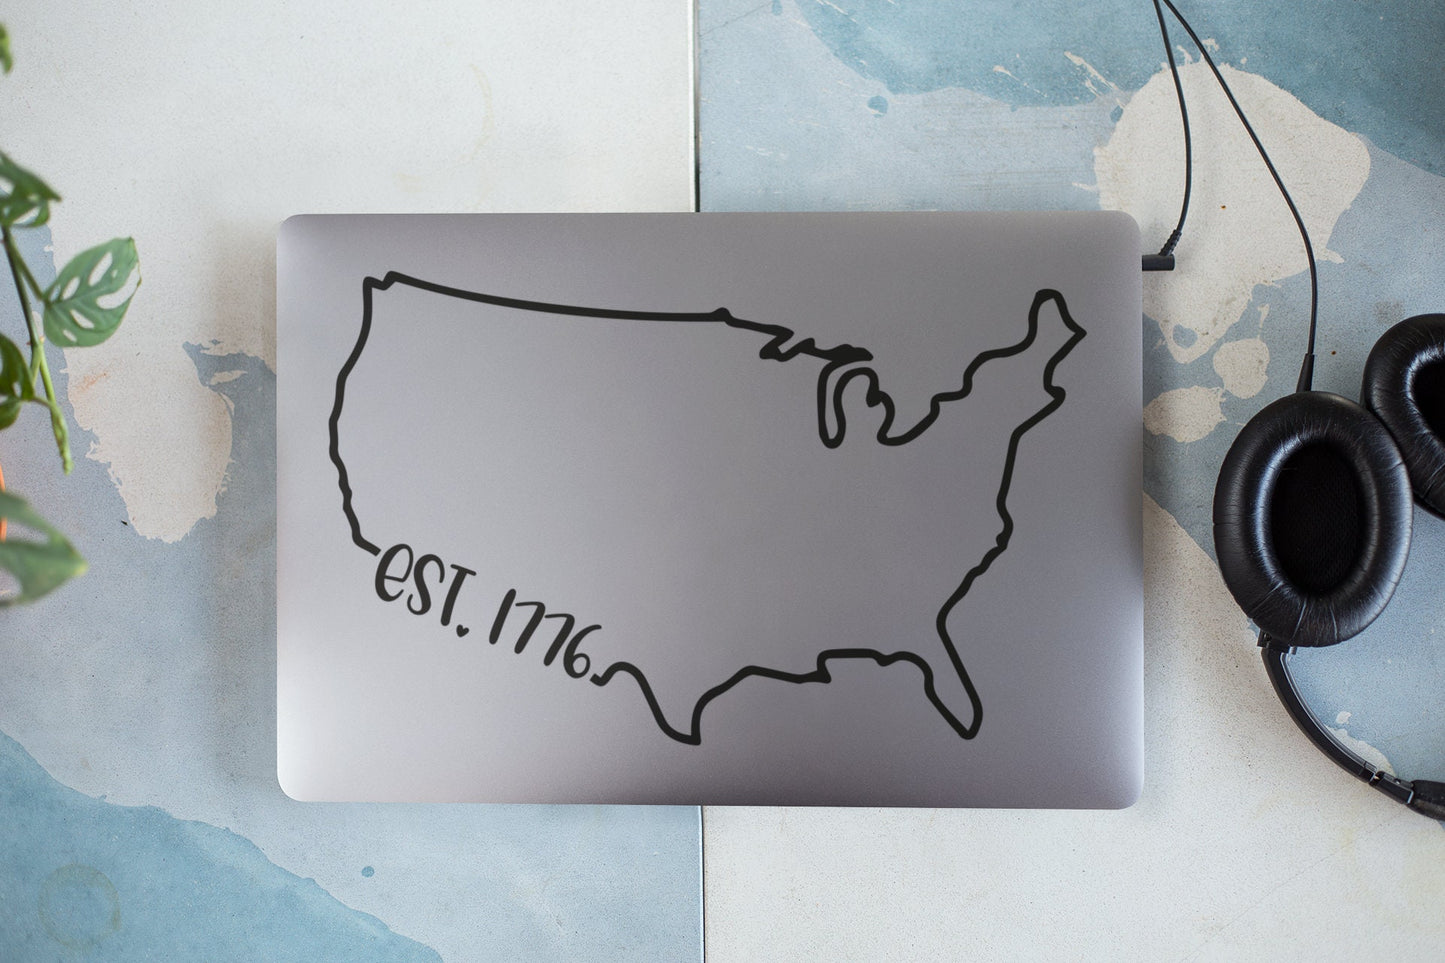 USA Country EST. 1776 Decal - Many Colors & Sizes